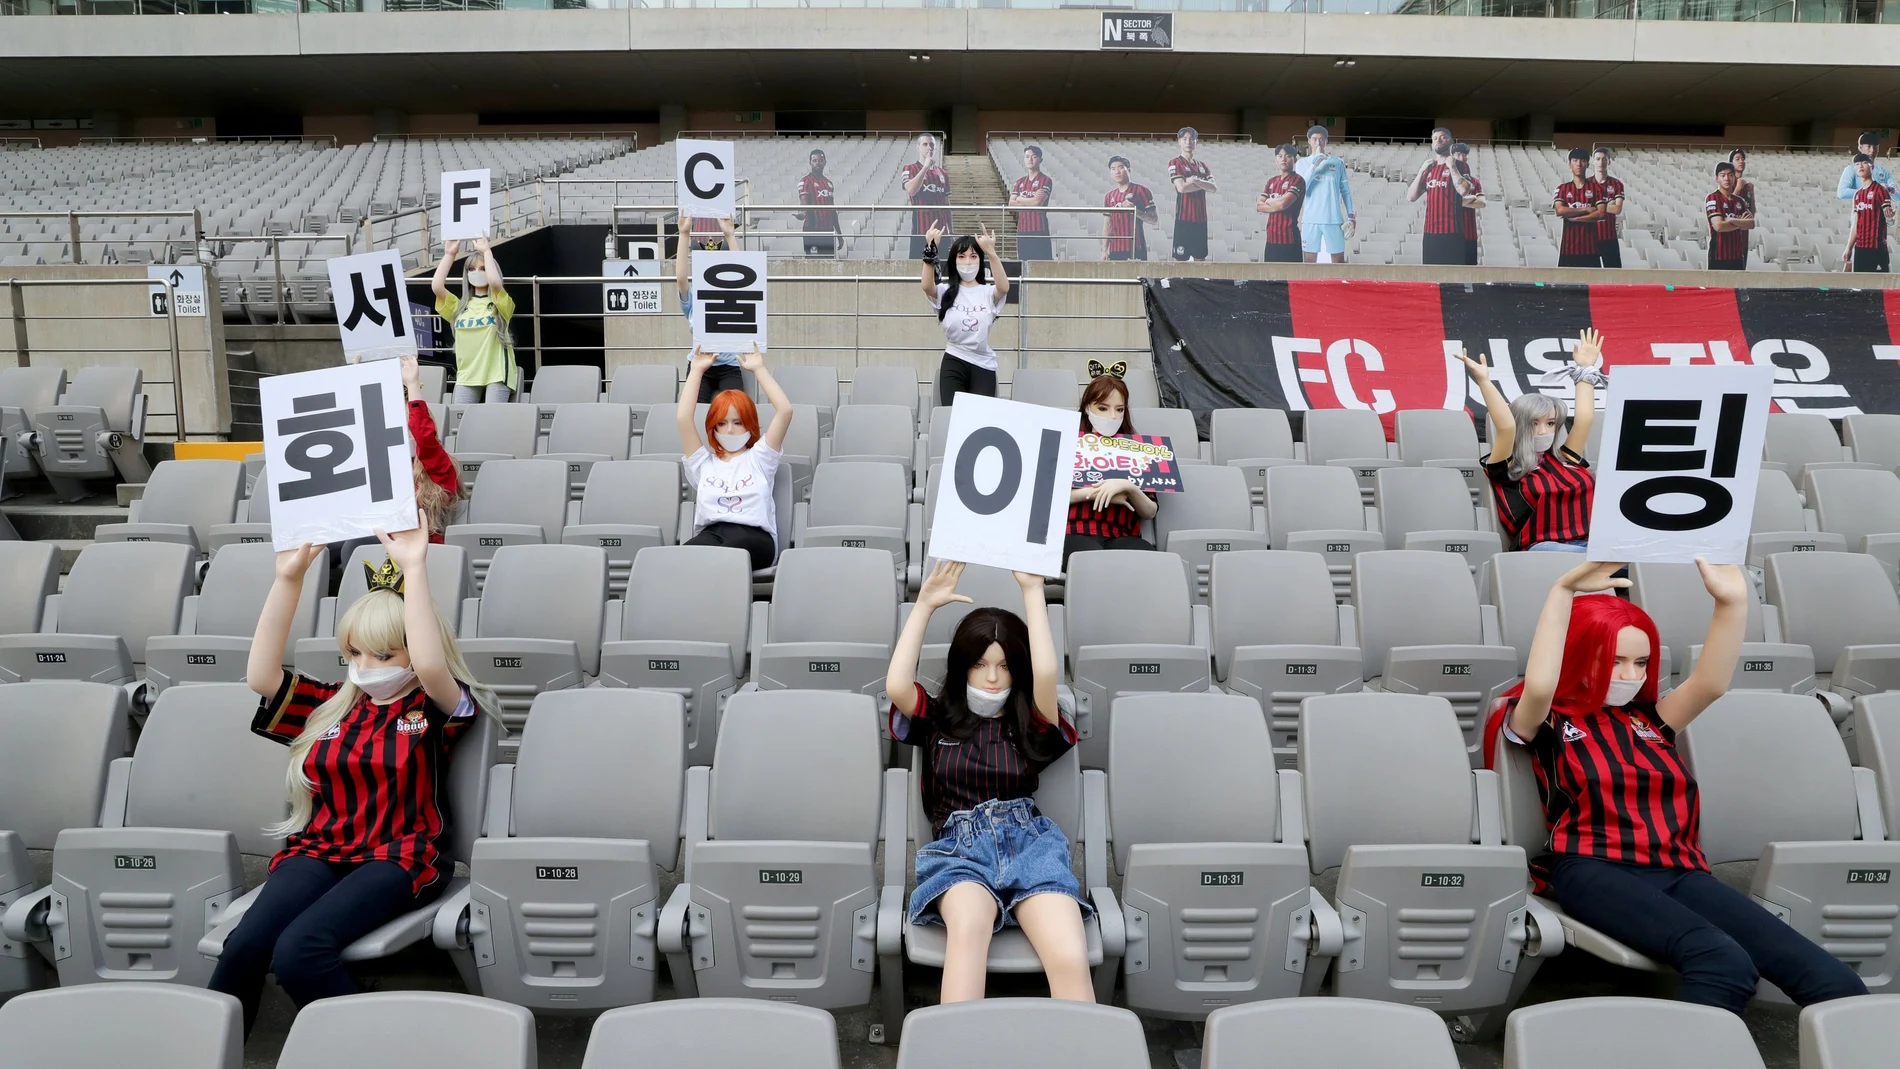 Mannequins are placed in spectator seats to cheer during football match in Seoul